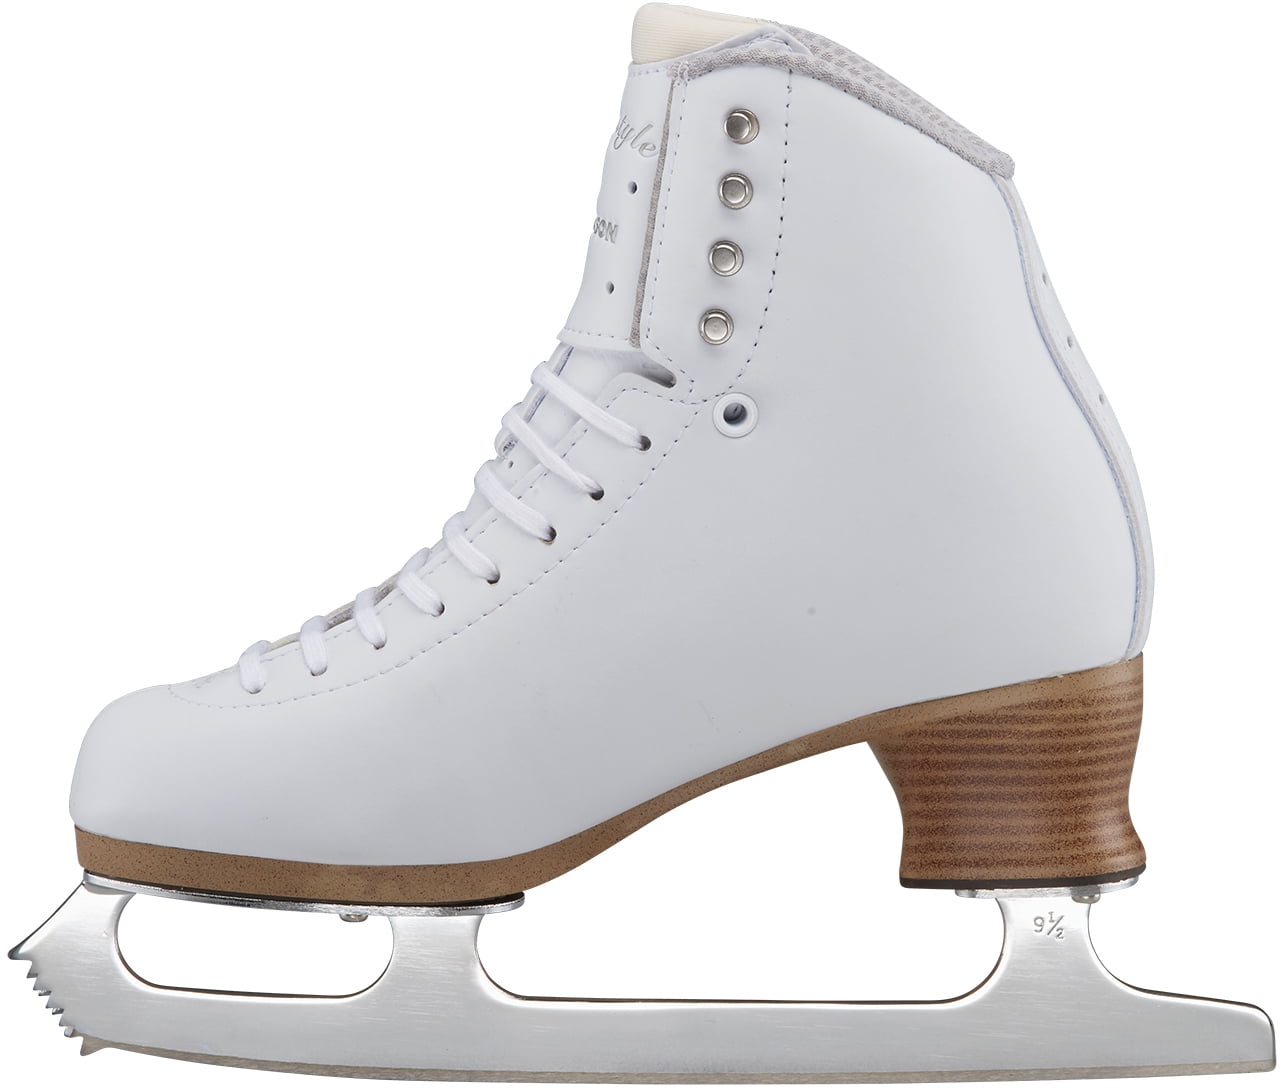 Jackson Ultima Fusion Freestyle with Aspire blade FS2190 / Figure Ice Skates for Women - Width Wide - W , Size Adult 9.5